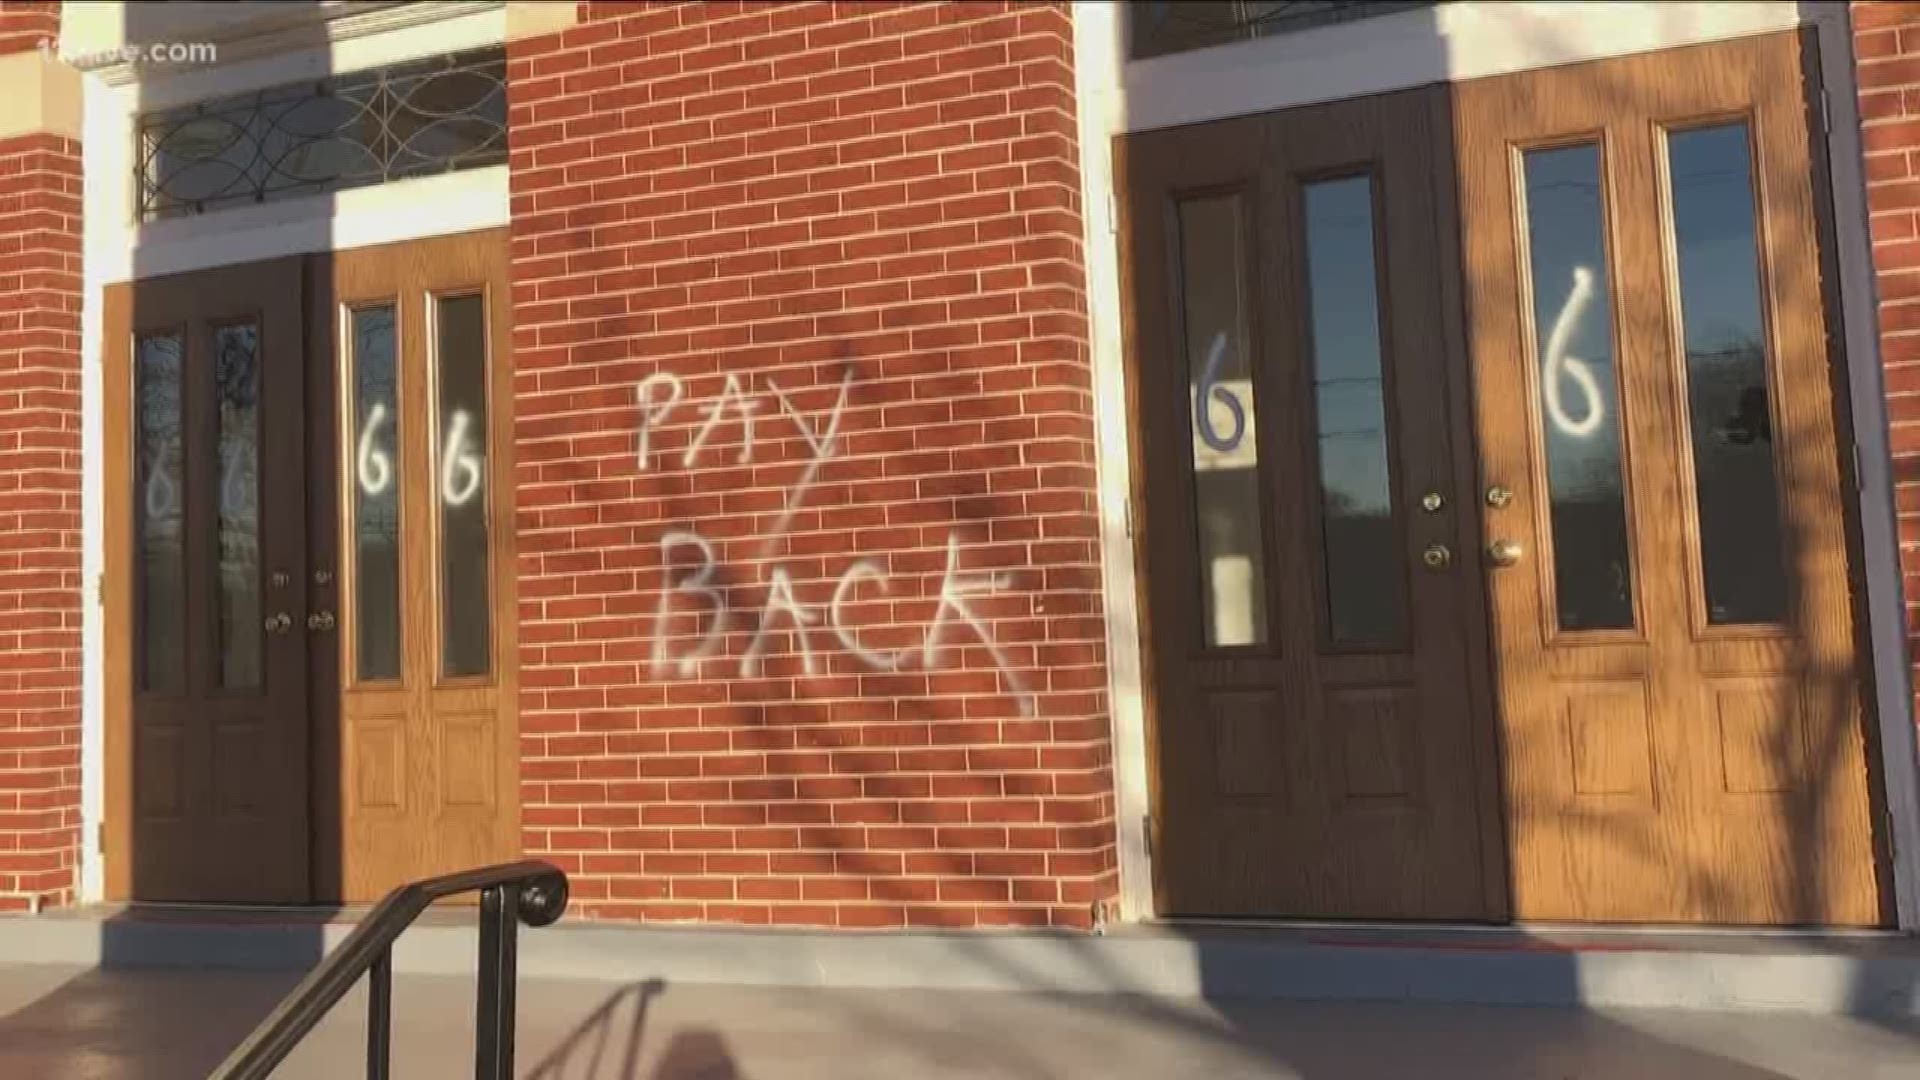 According to the church's pastor, Rev. Isaiah Waddy, the graffiti included "666" and "Payback" sprayed on the front doors of the church building itself.